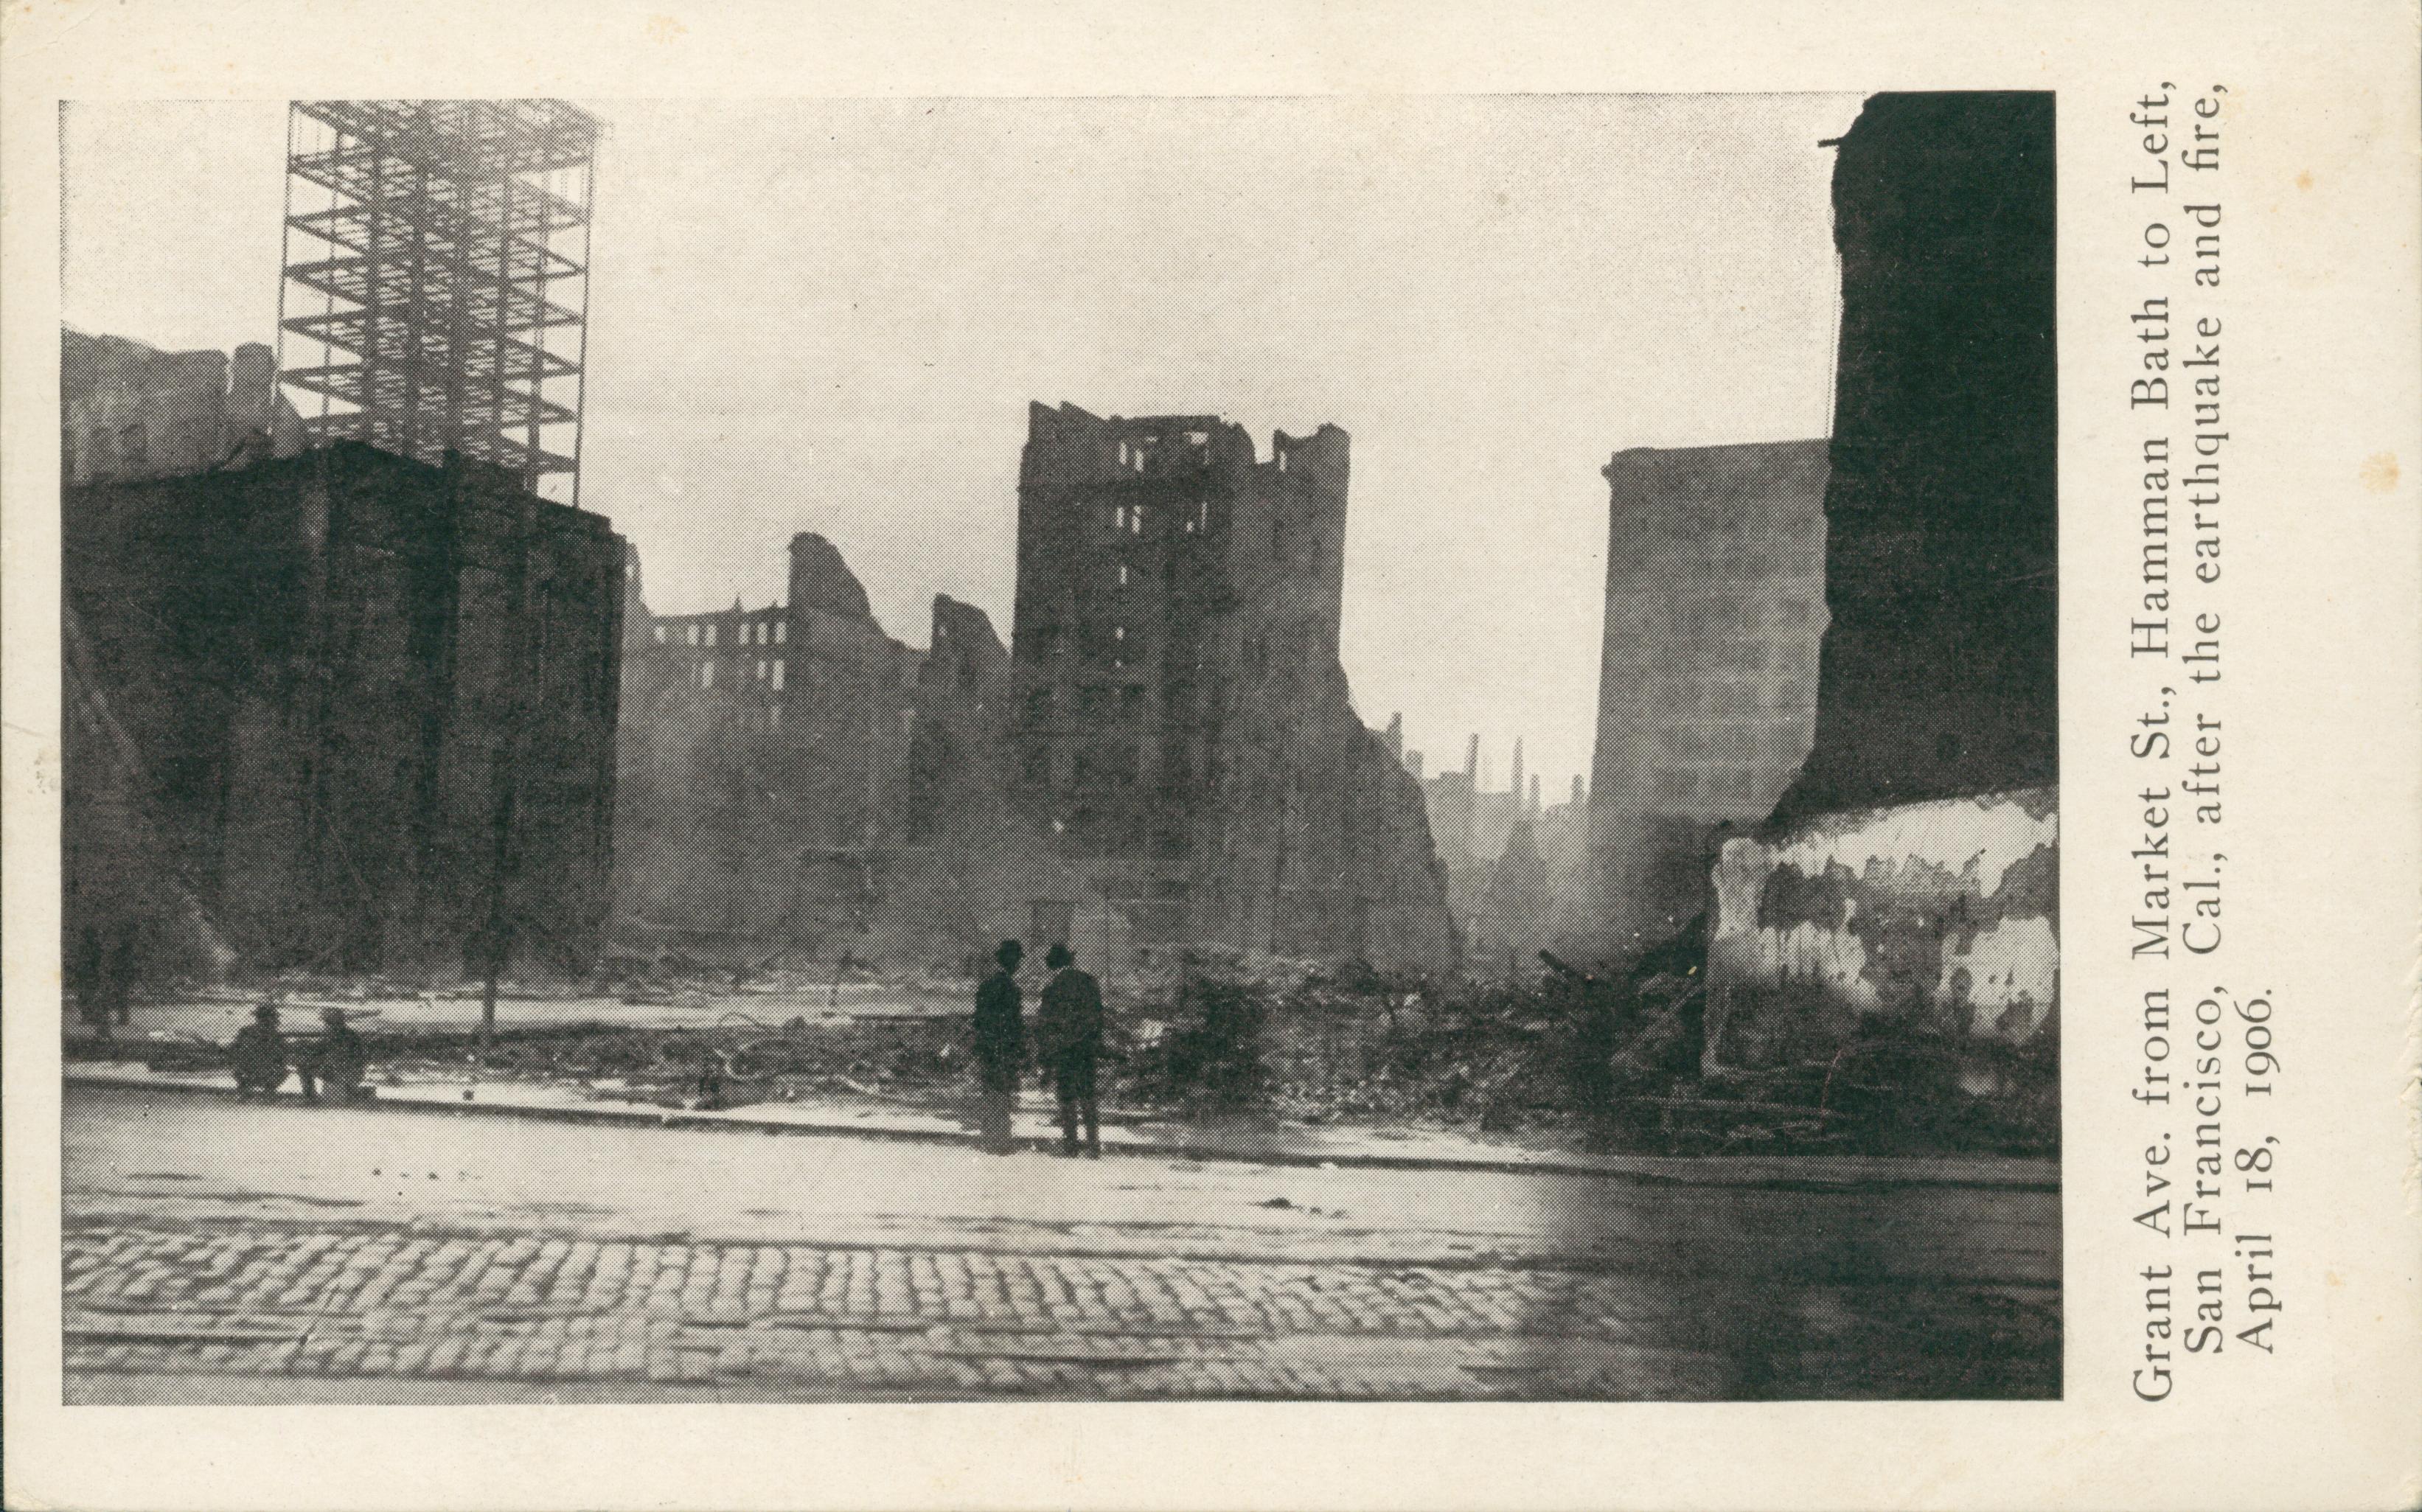 Shows four men looking at several destroyed buildings.